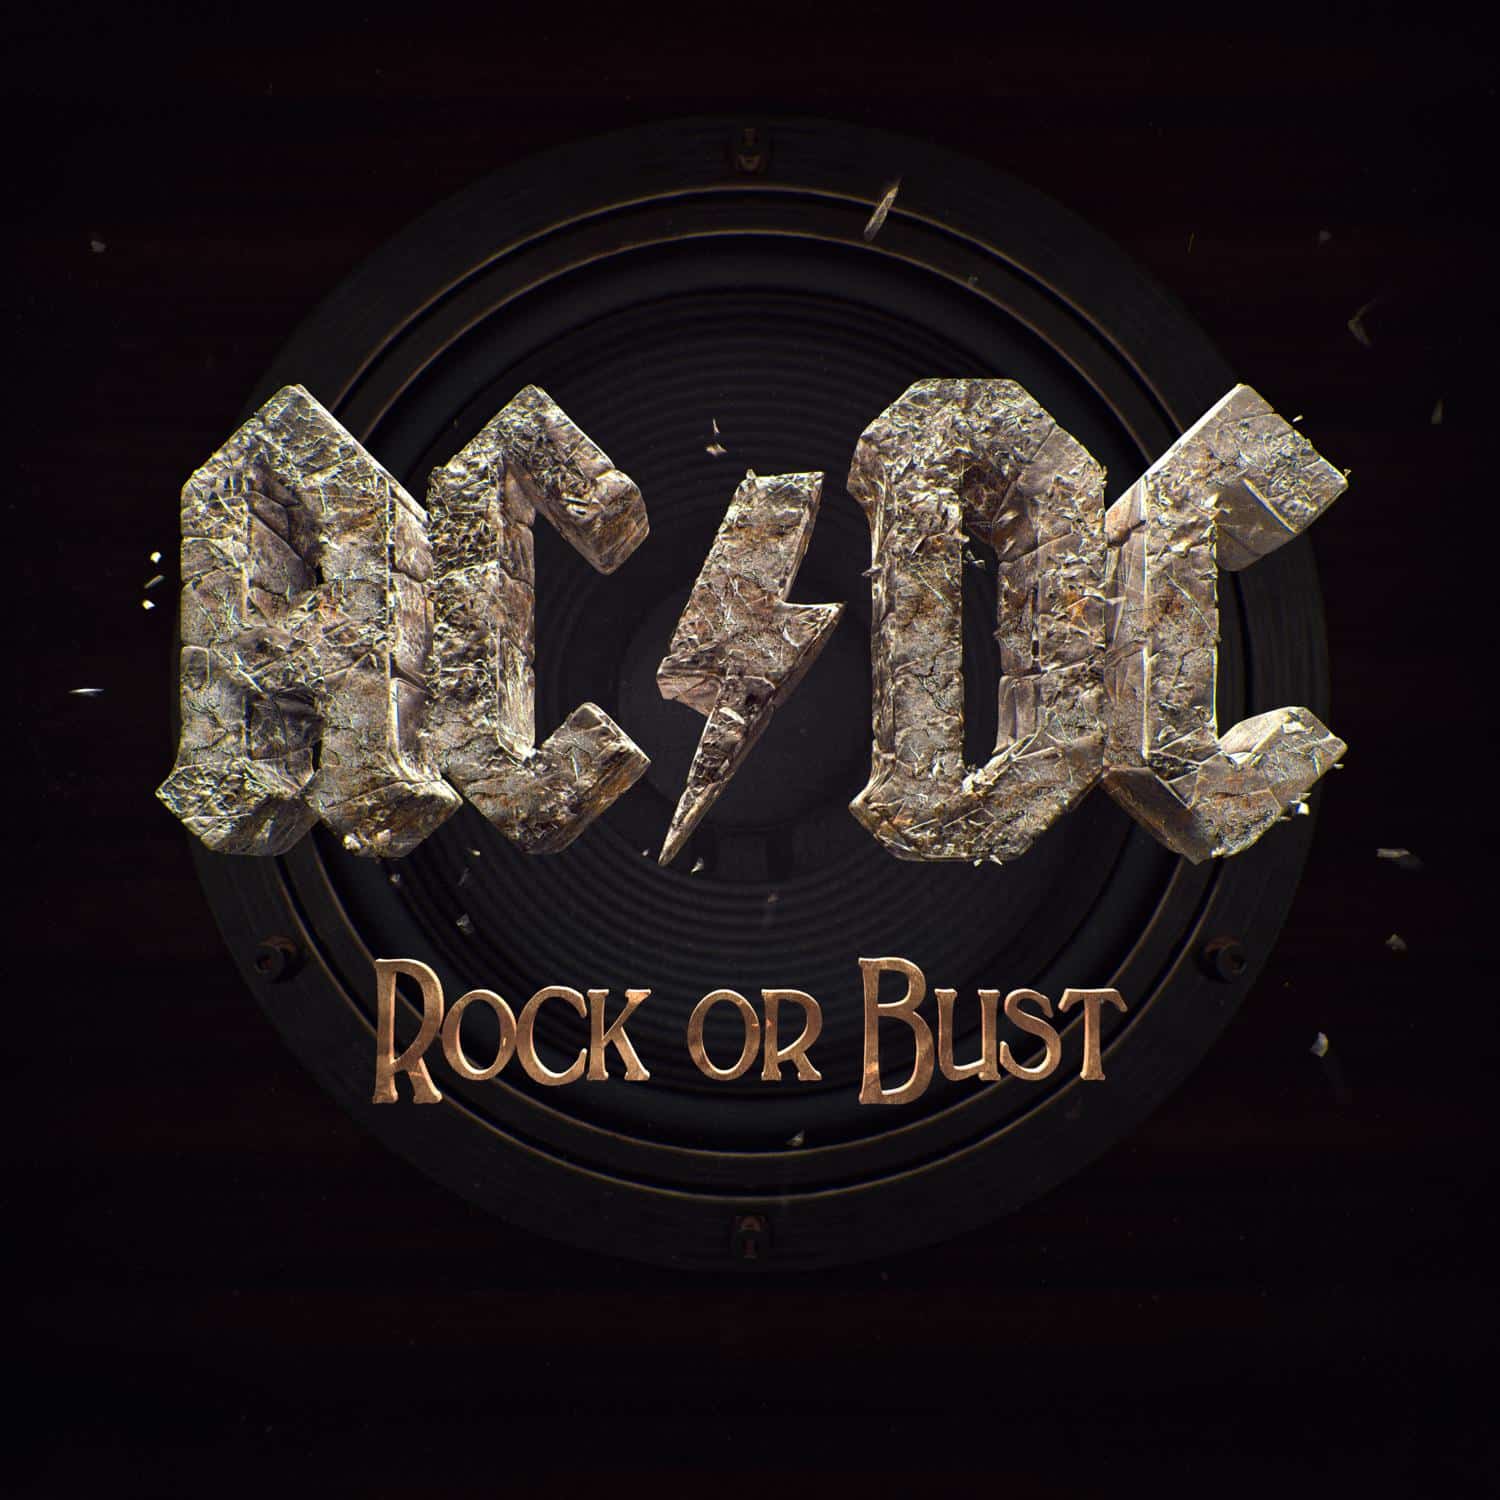 acdc_bust